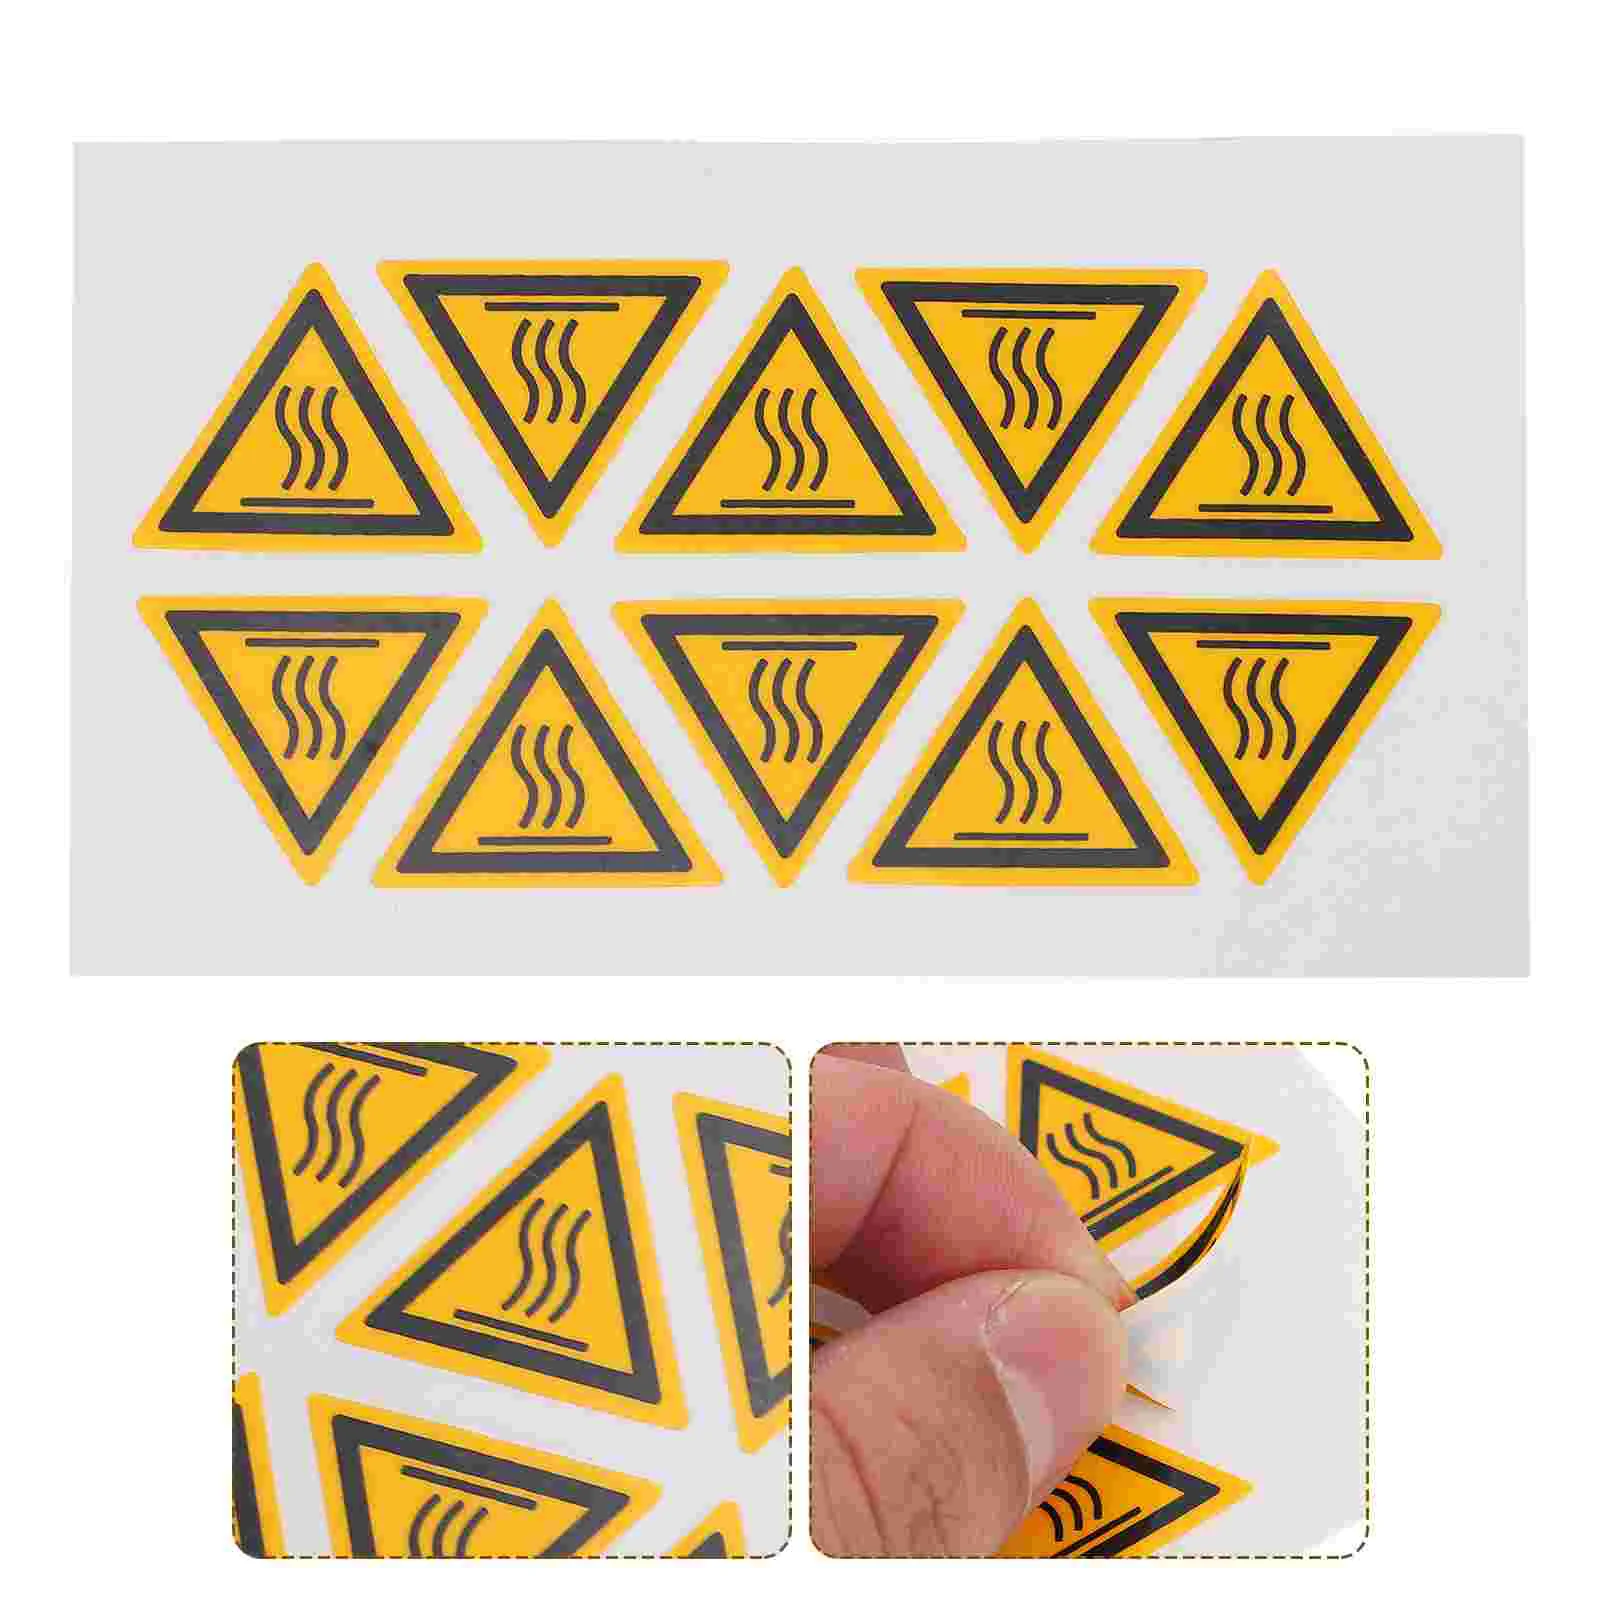 

10 Pcs Pay Attention to High Temperature Warning Impresora De Sticker Equipment Decal Caution Scald Label Pp Synthetic Paper